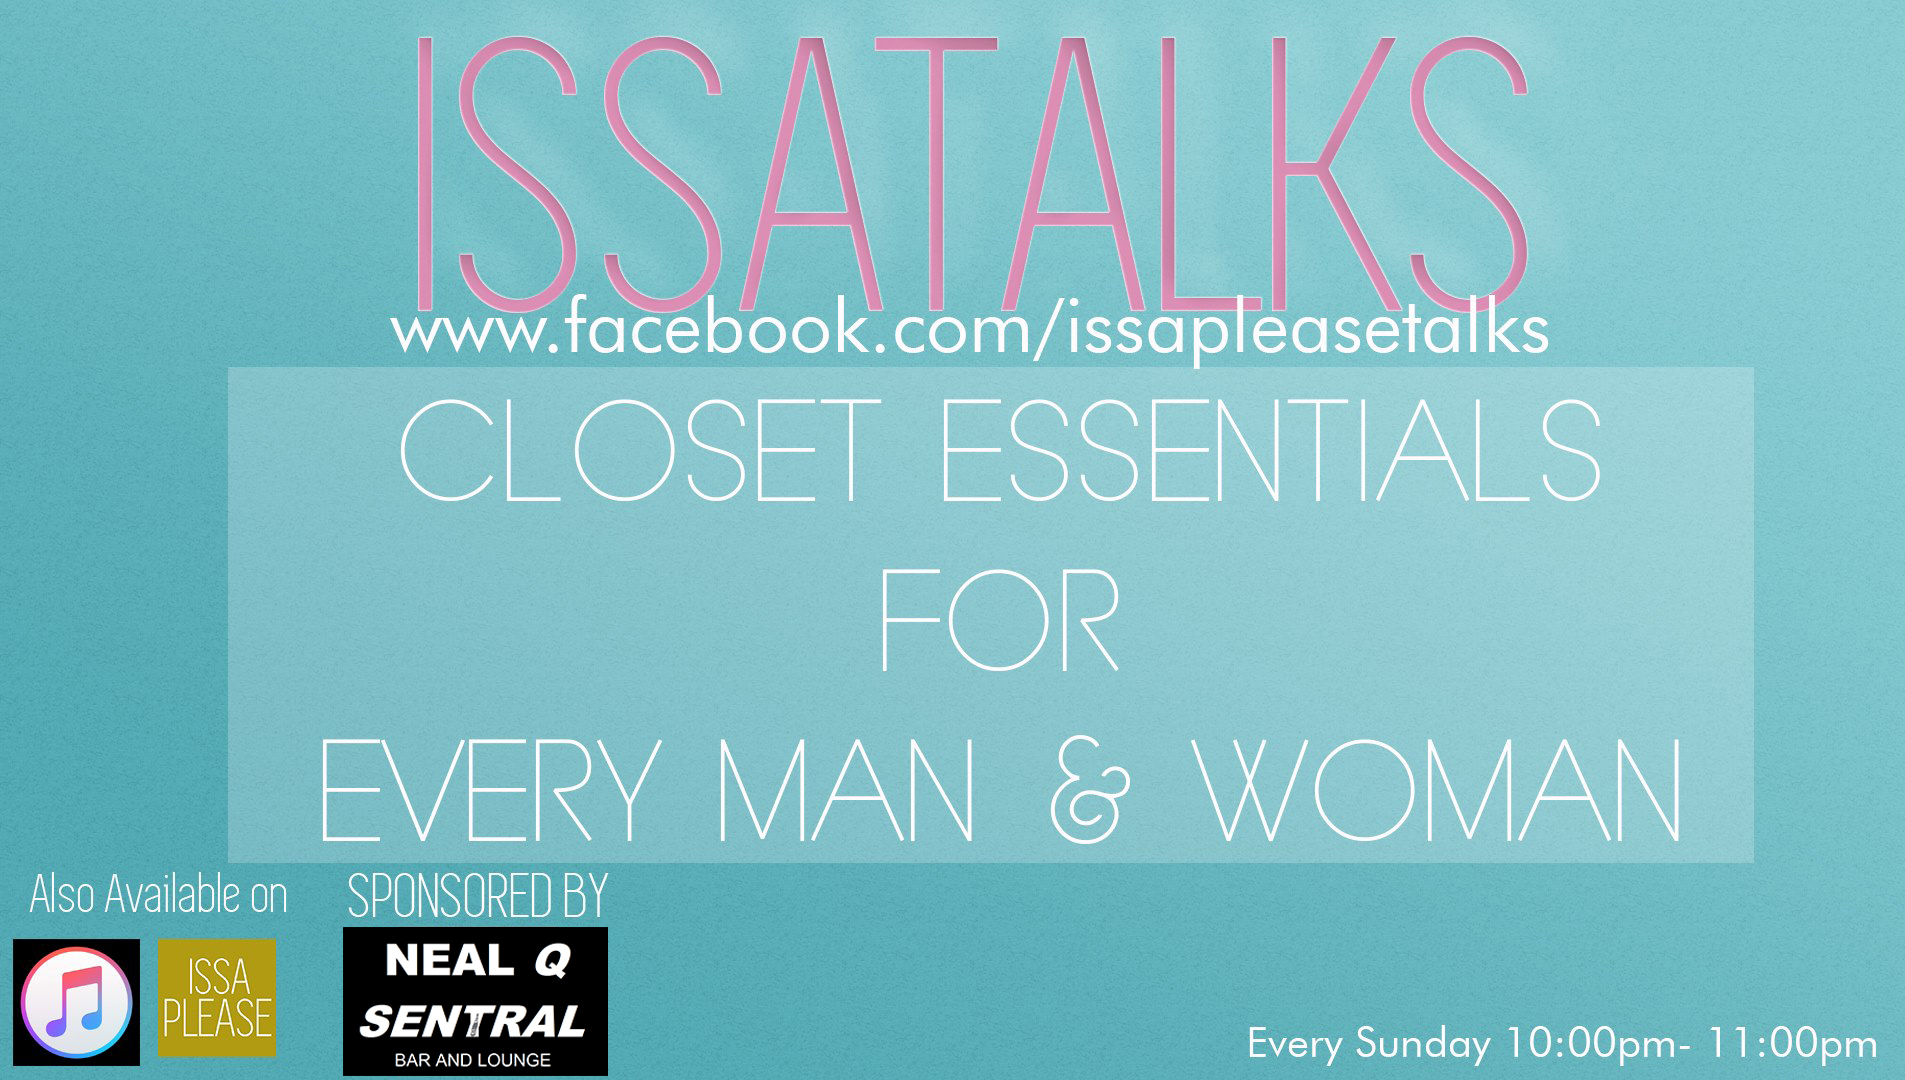 IssaTalks Episode 14: Closet Essentials For The Fashionably Impaired